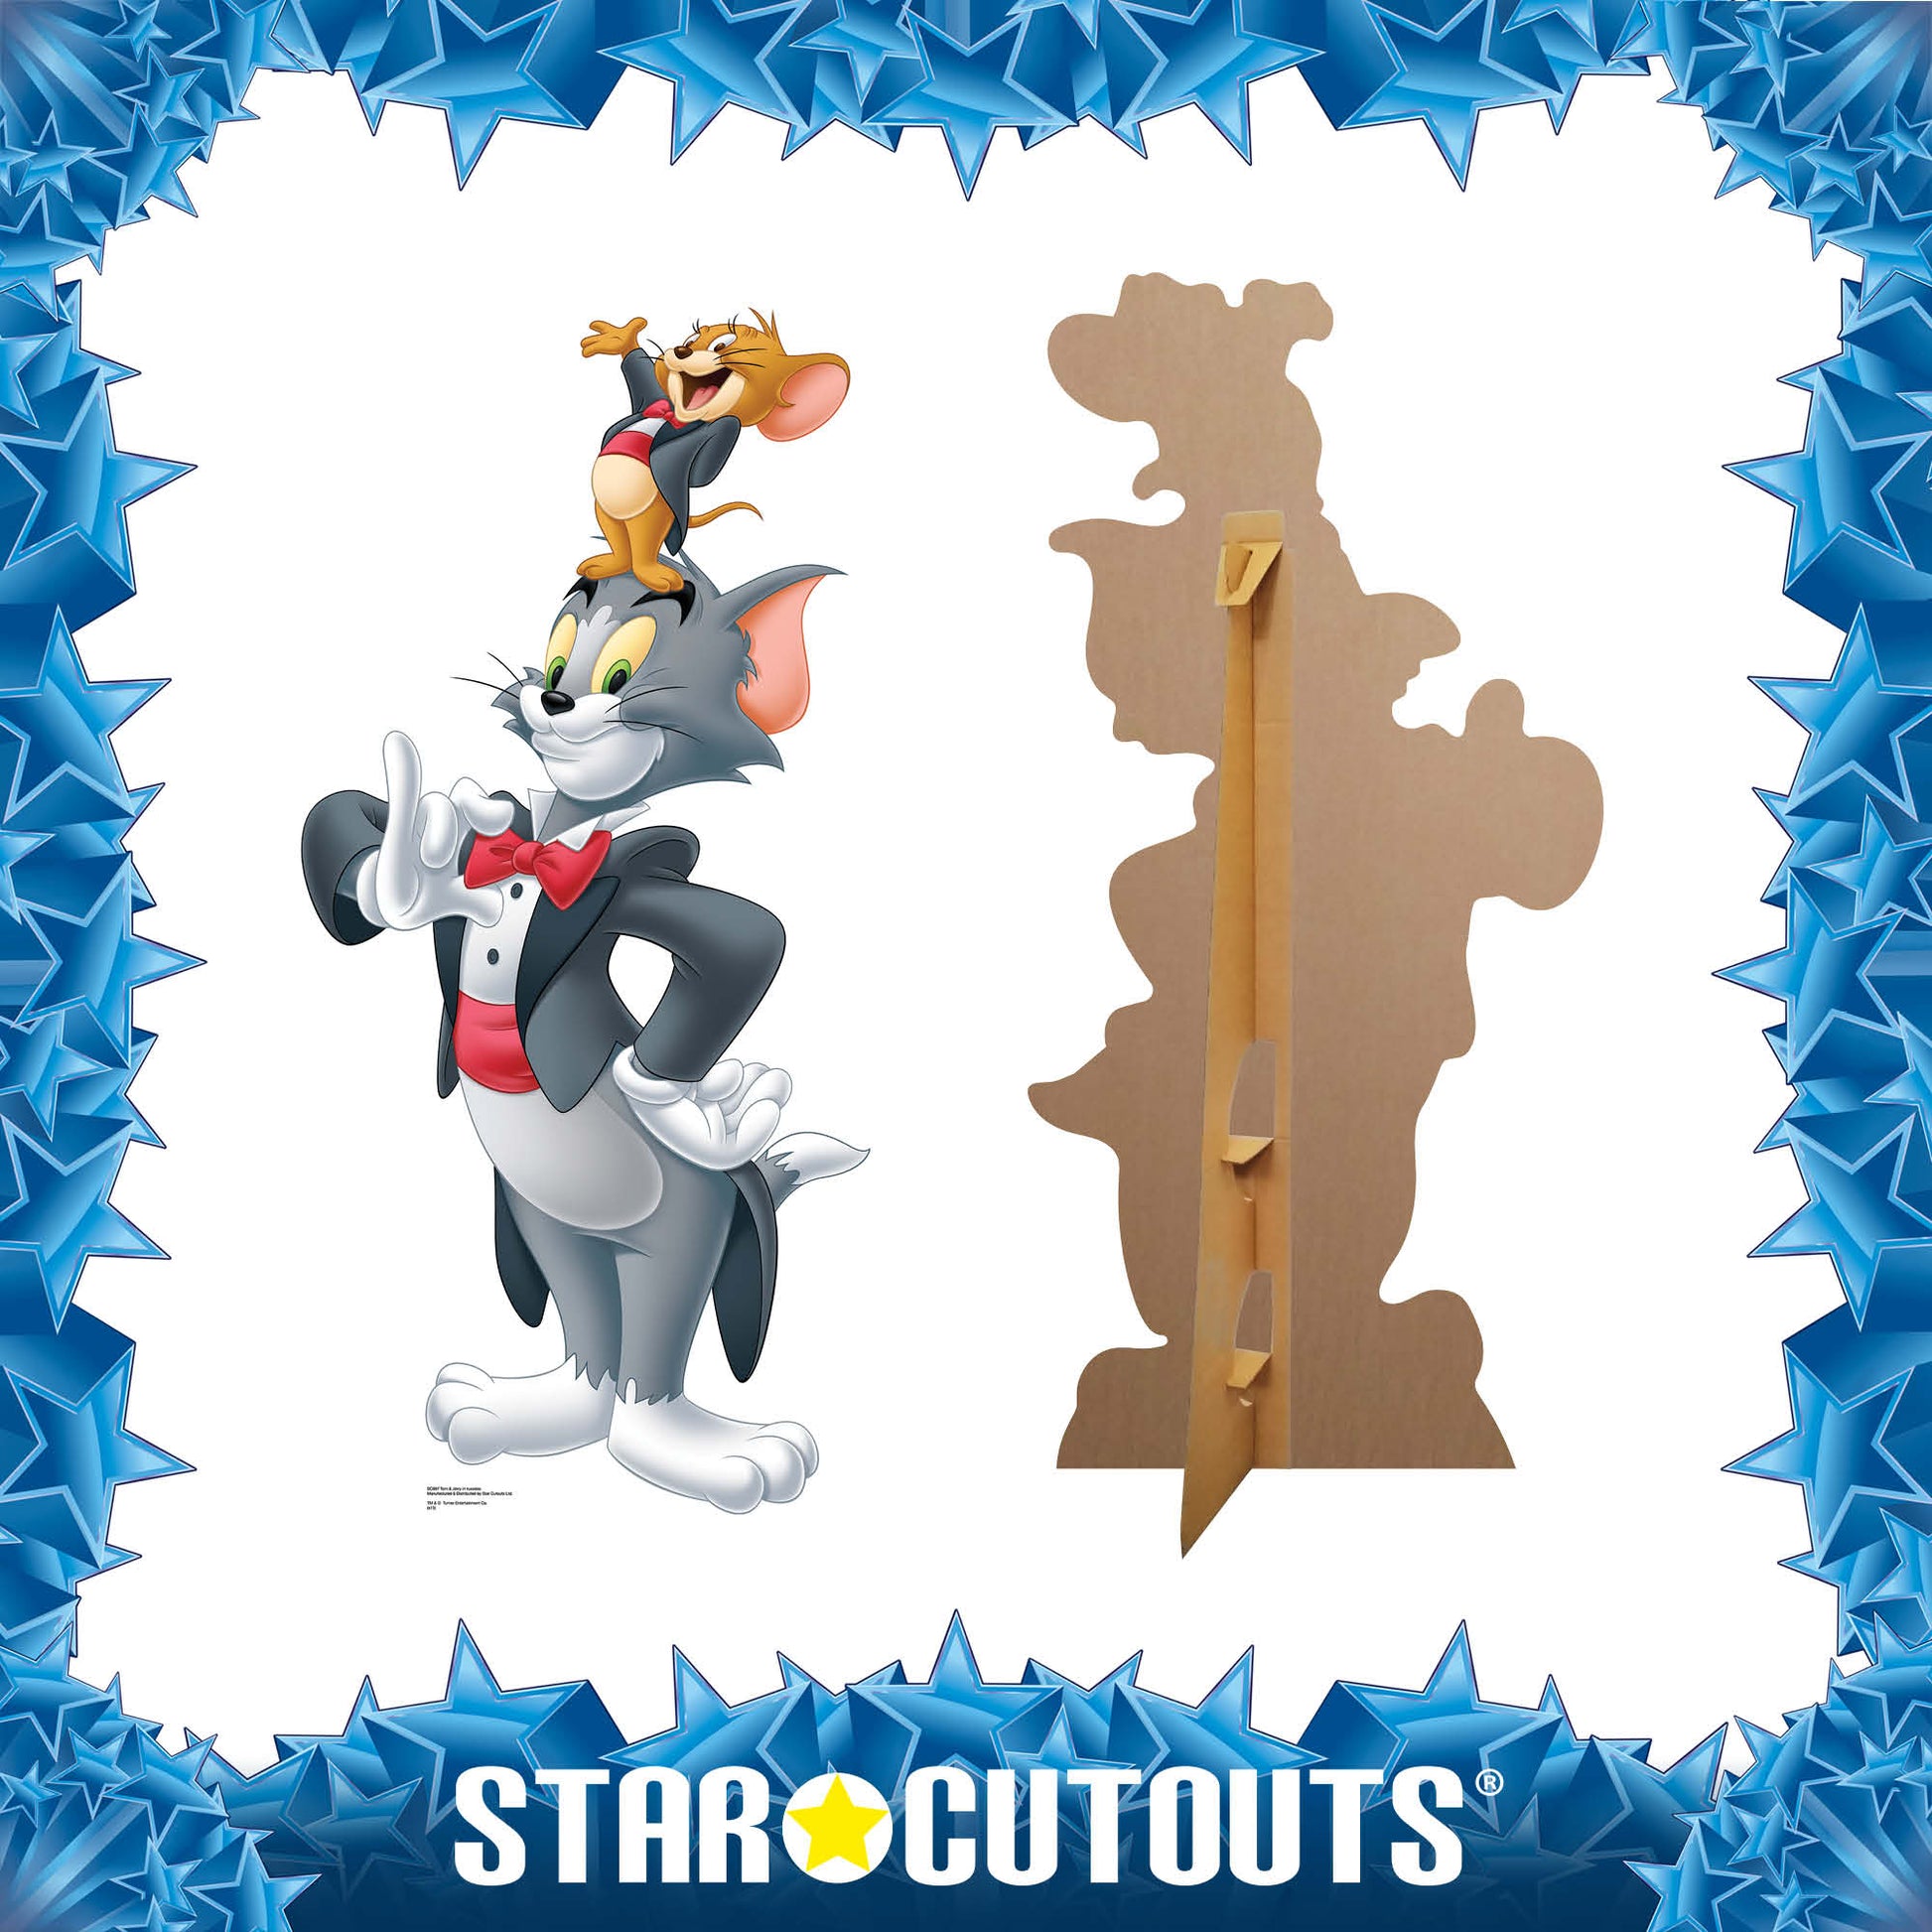 Tom and Jerry Wearing Tuxedos Cardboard Cutout / Standee / Standup